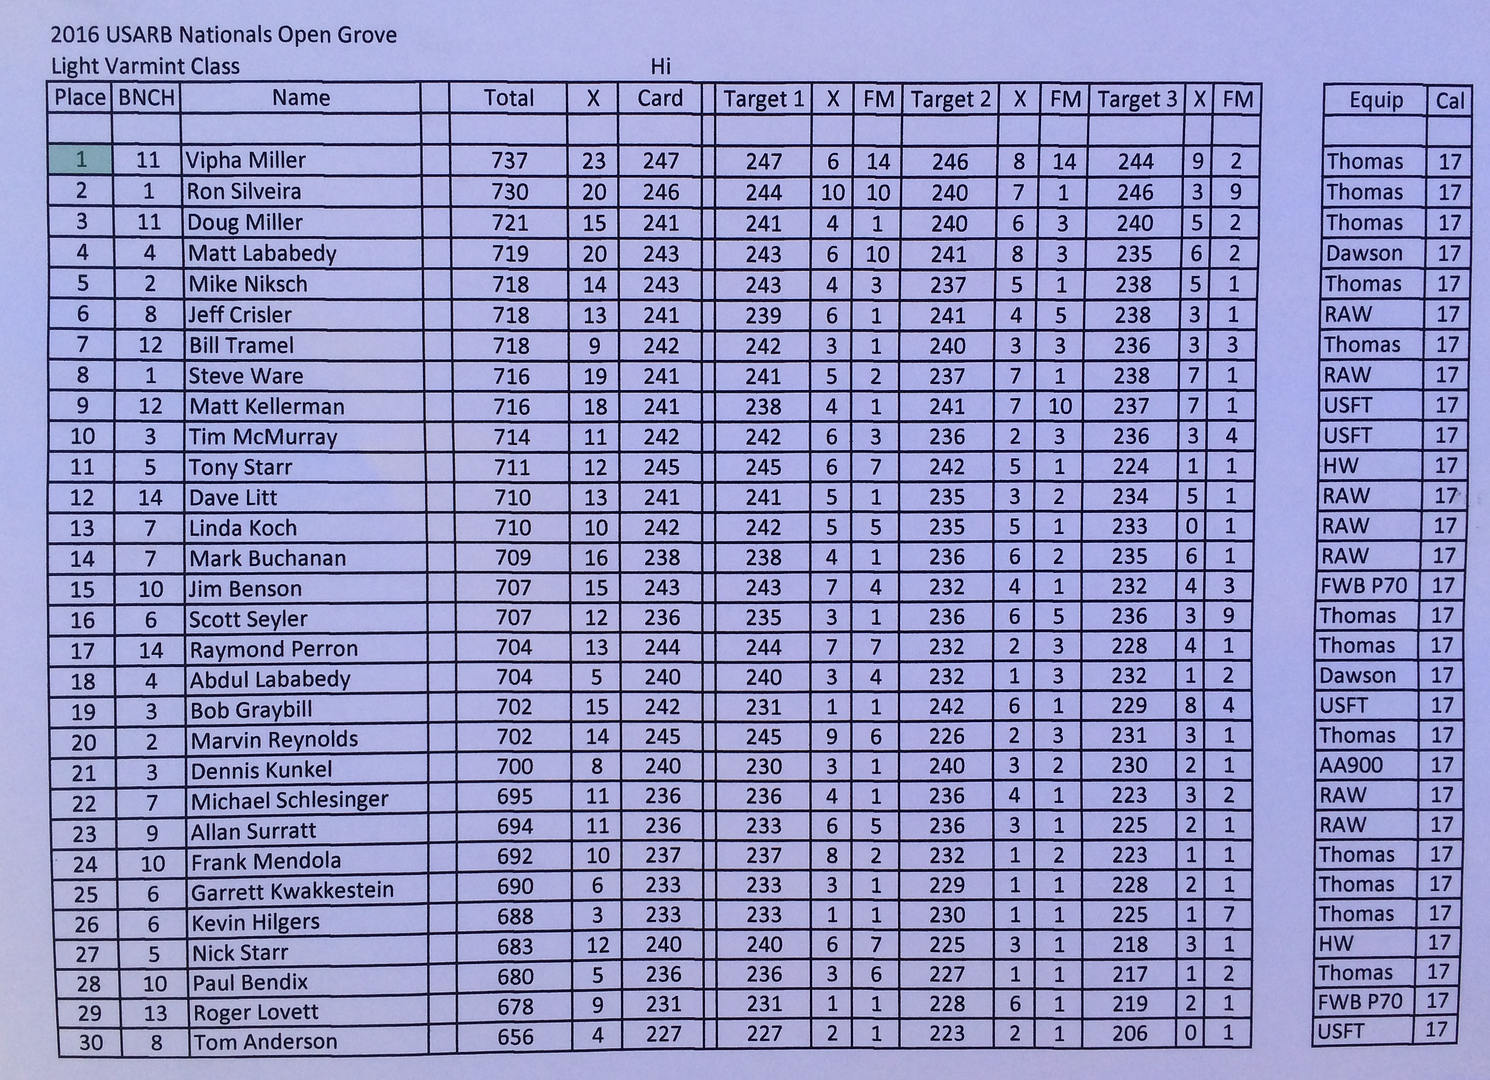 USA%20Nationals%20LV%20class%20top%2030_zpslwc1vp4y.png